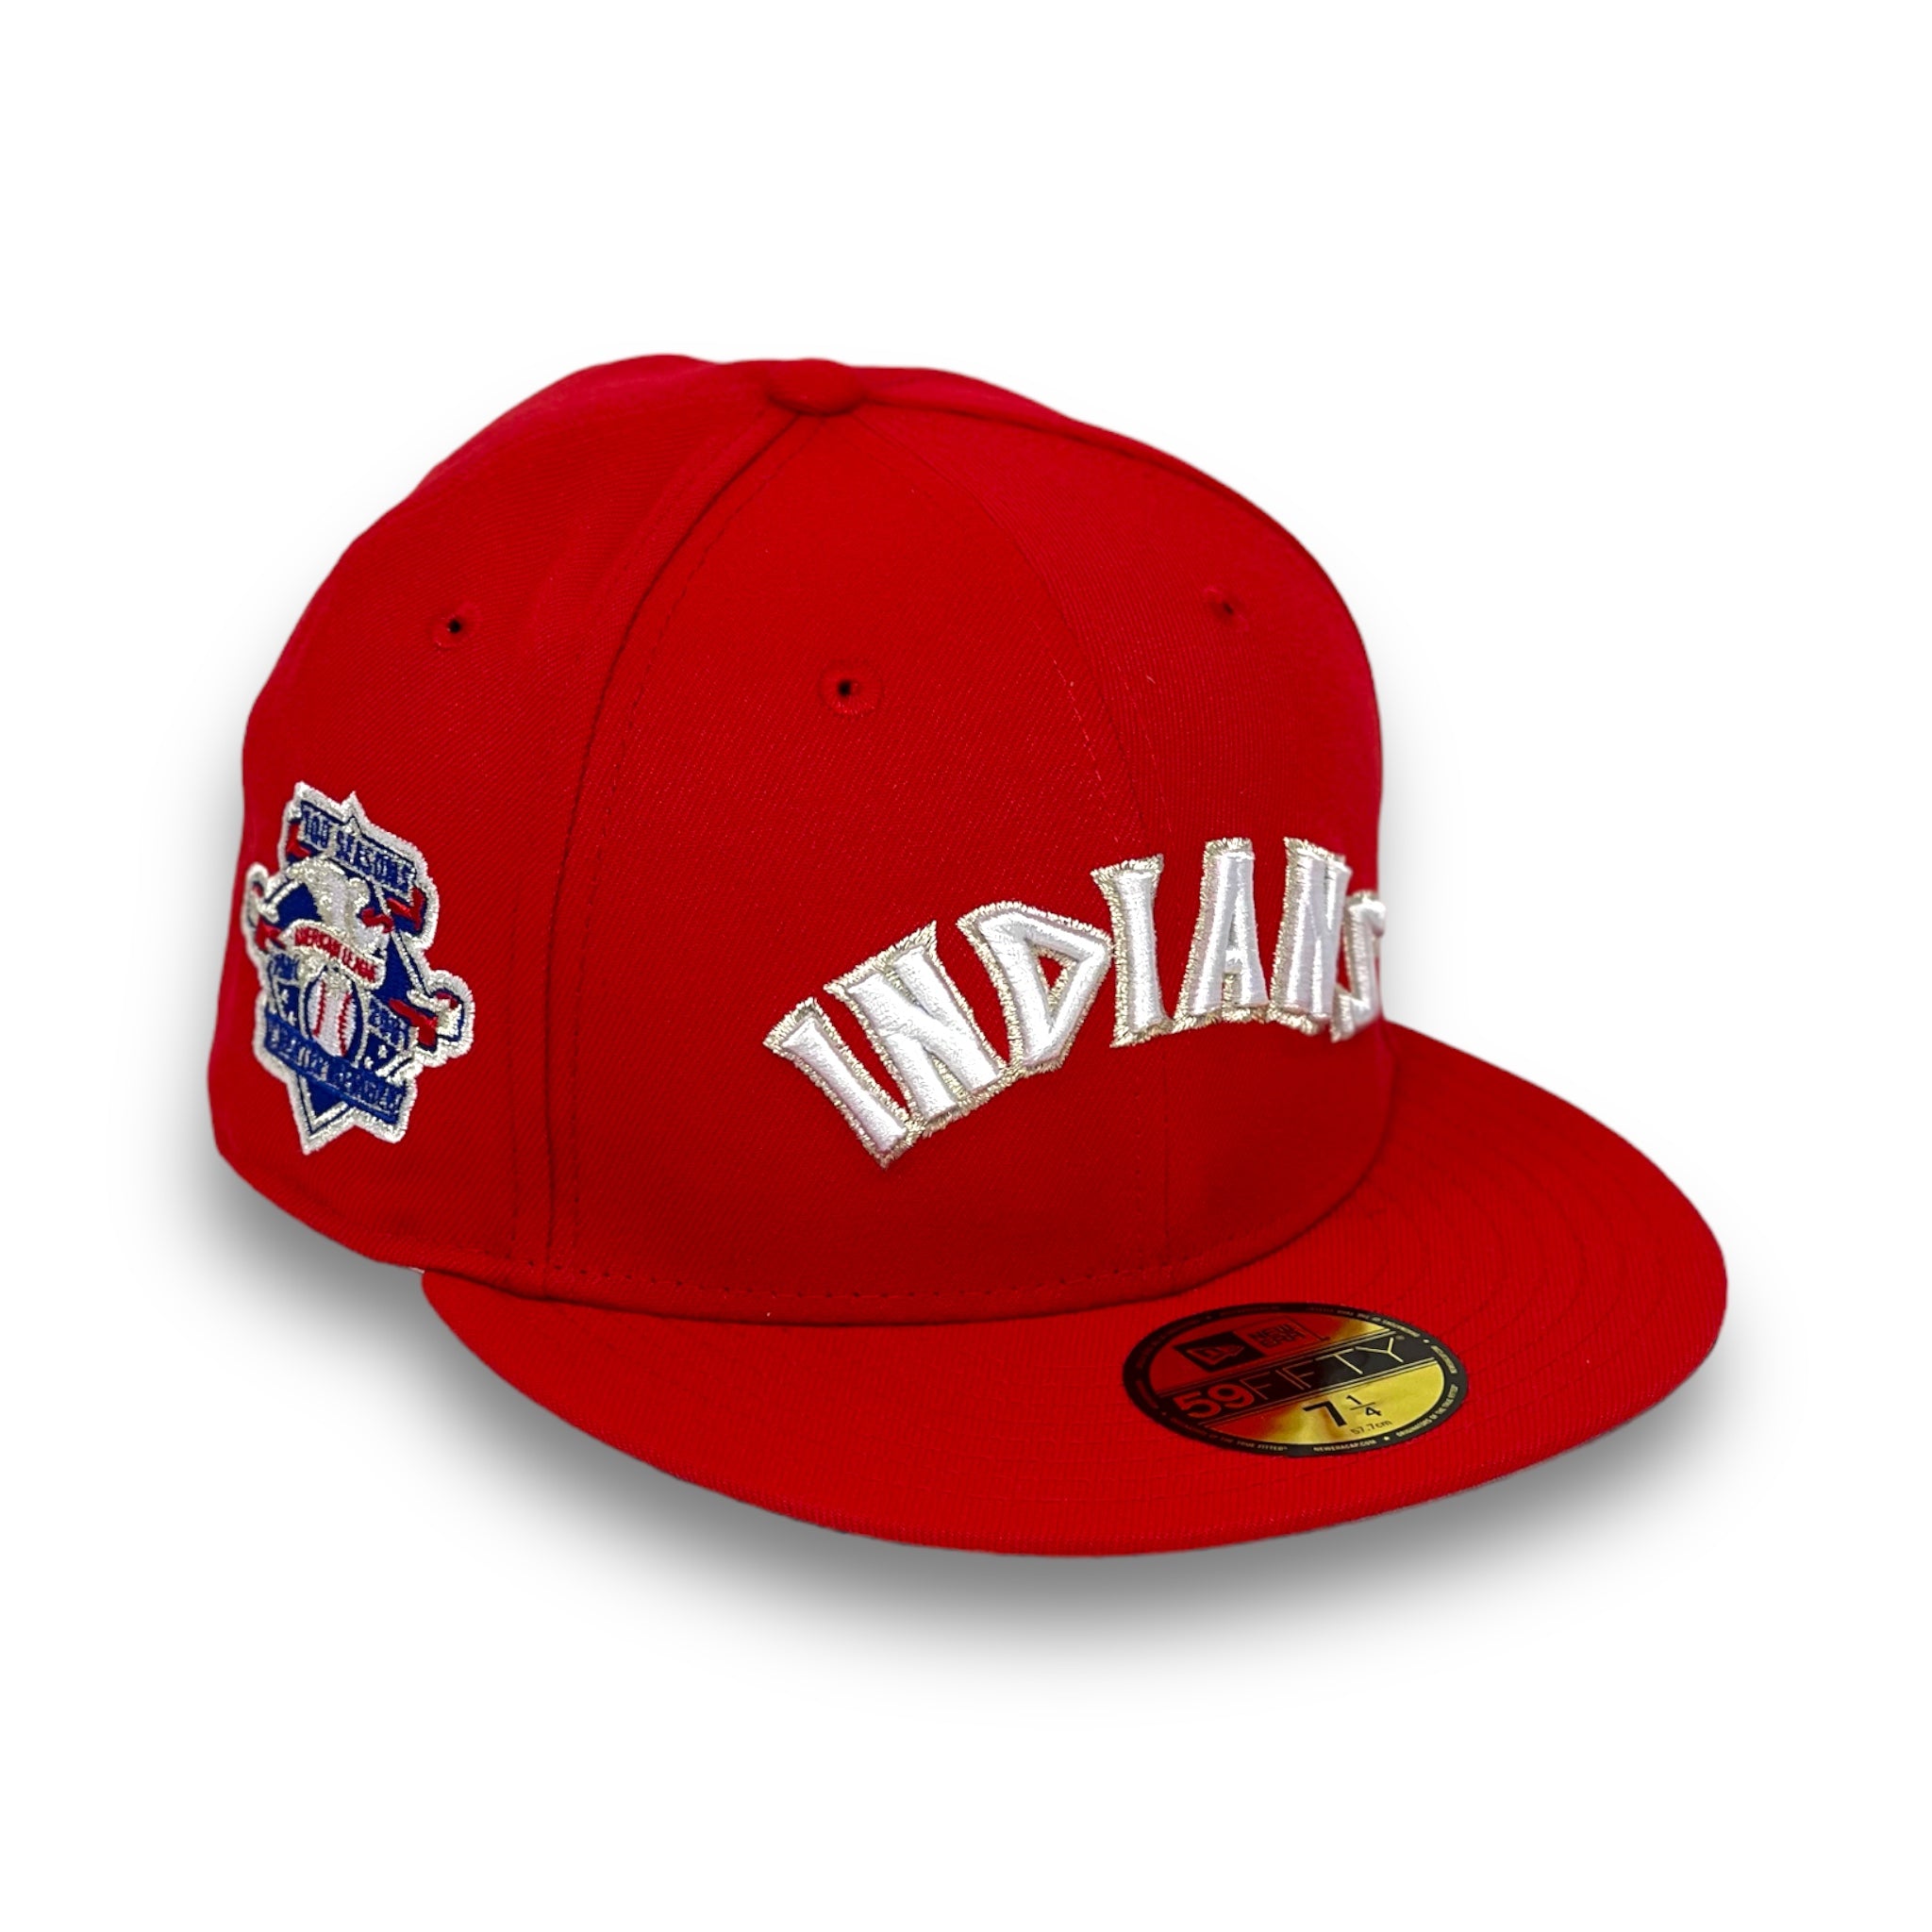 CLEVELAND INDIANS (RED) (MLB 100TH ANN) NEW ERA 59FIFTY FITTED (GREY UNDER VISOR)